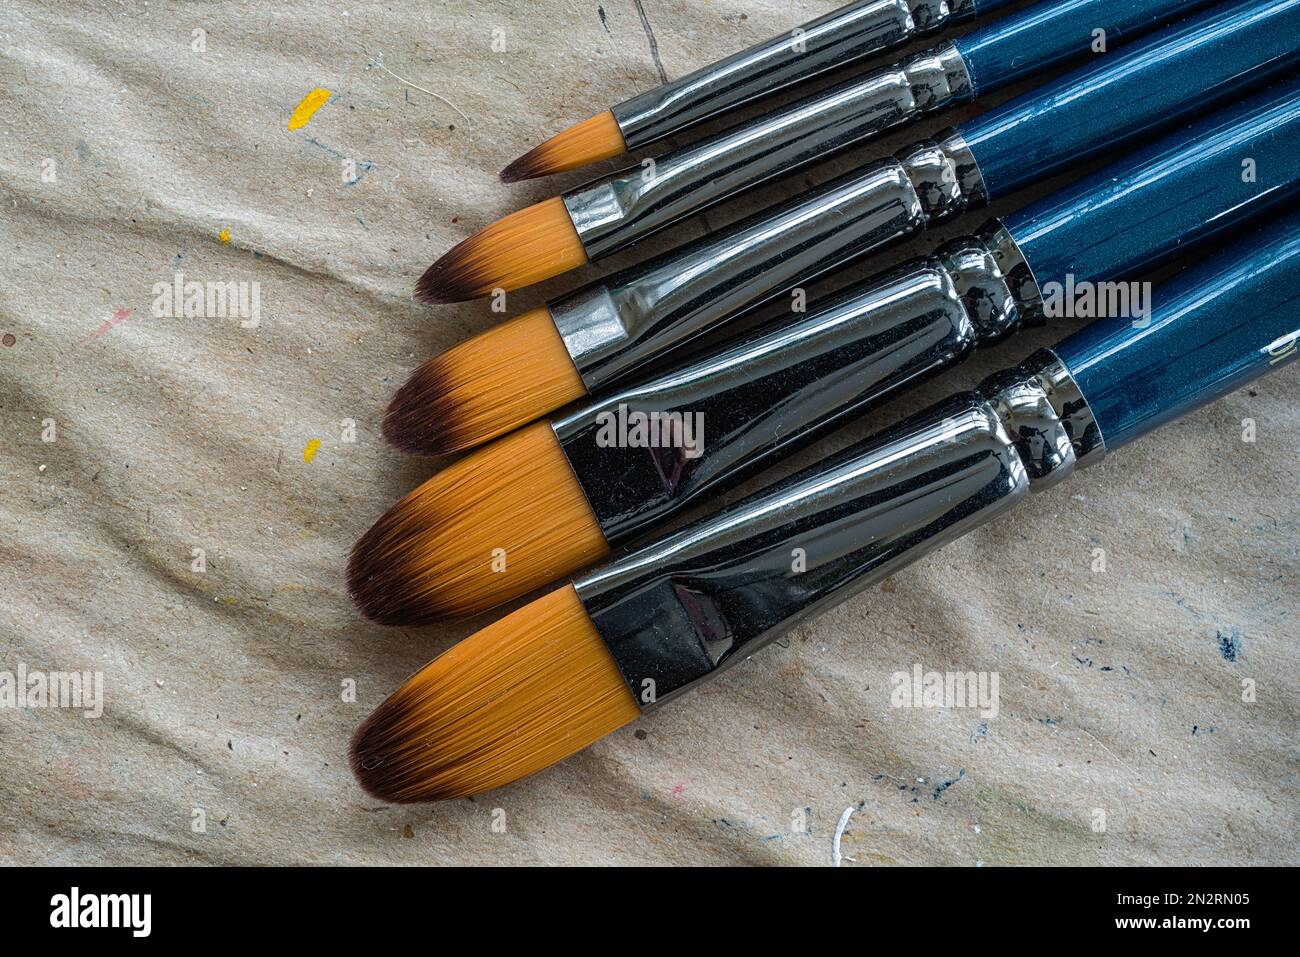 A selection of filbert tipped artist's paint brushes. Stock Photo